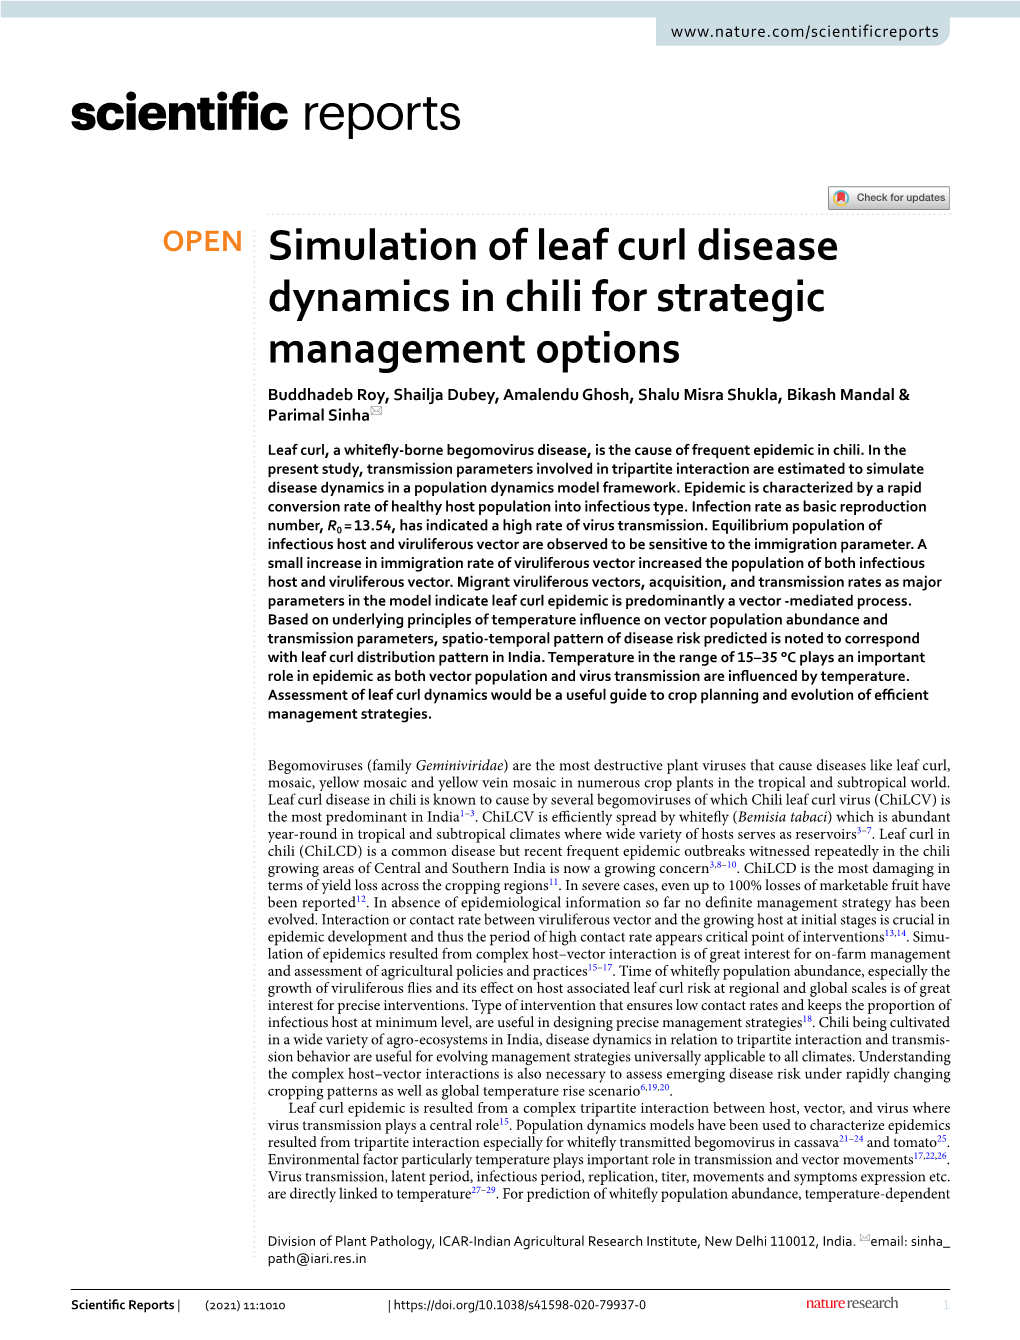 Simulation of Leaf Curl Disease Dynamics in Chili for Strategic Management Options